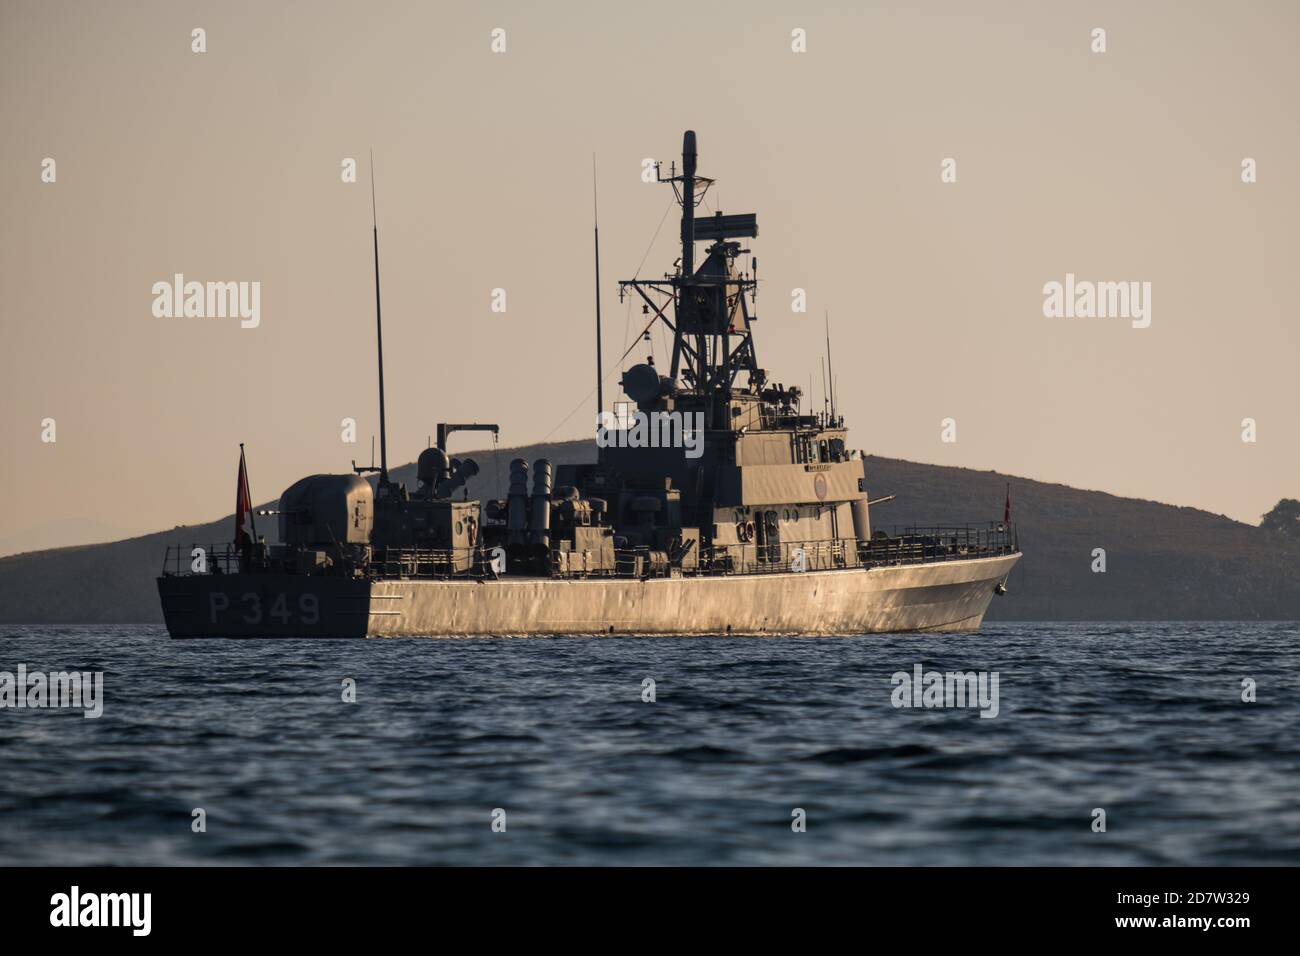 Due to the tension between Greece and Turkey, a military attack boat  P-349 has been placed on Palamutbuku beach, Datca, Mugla, Turkey. Stock Photo